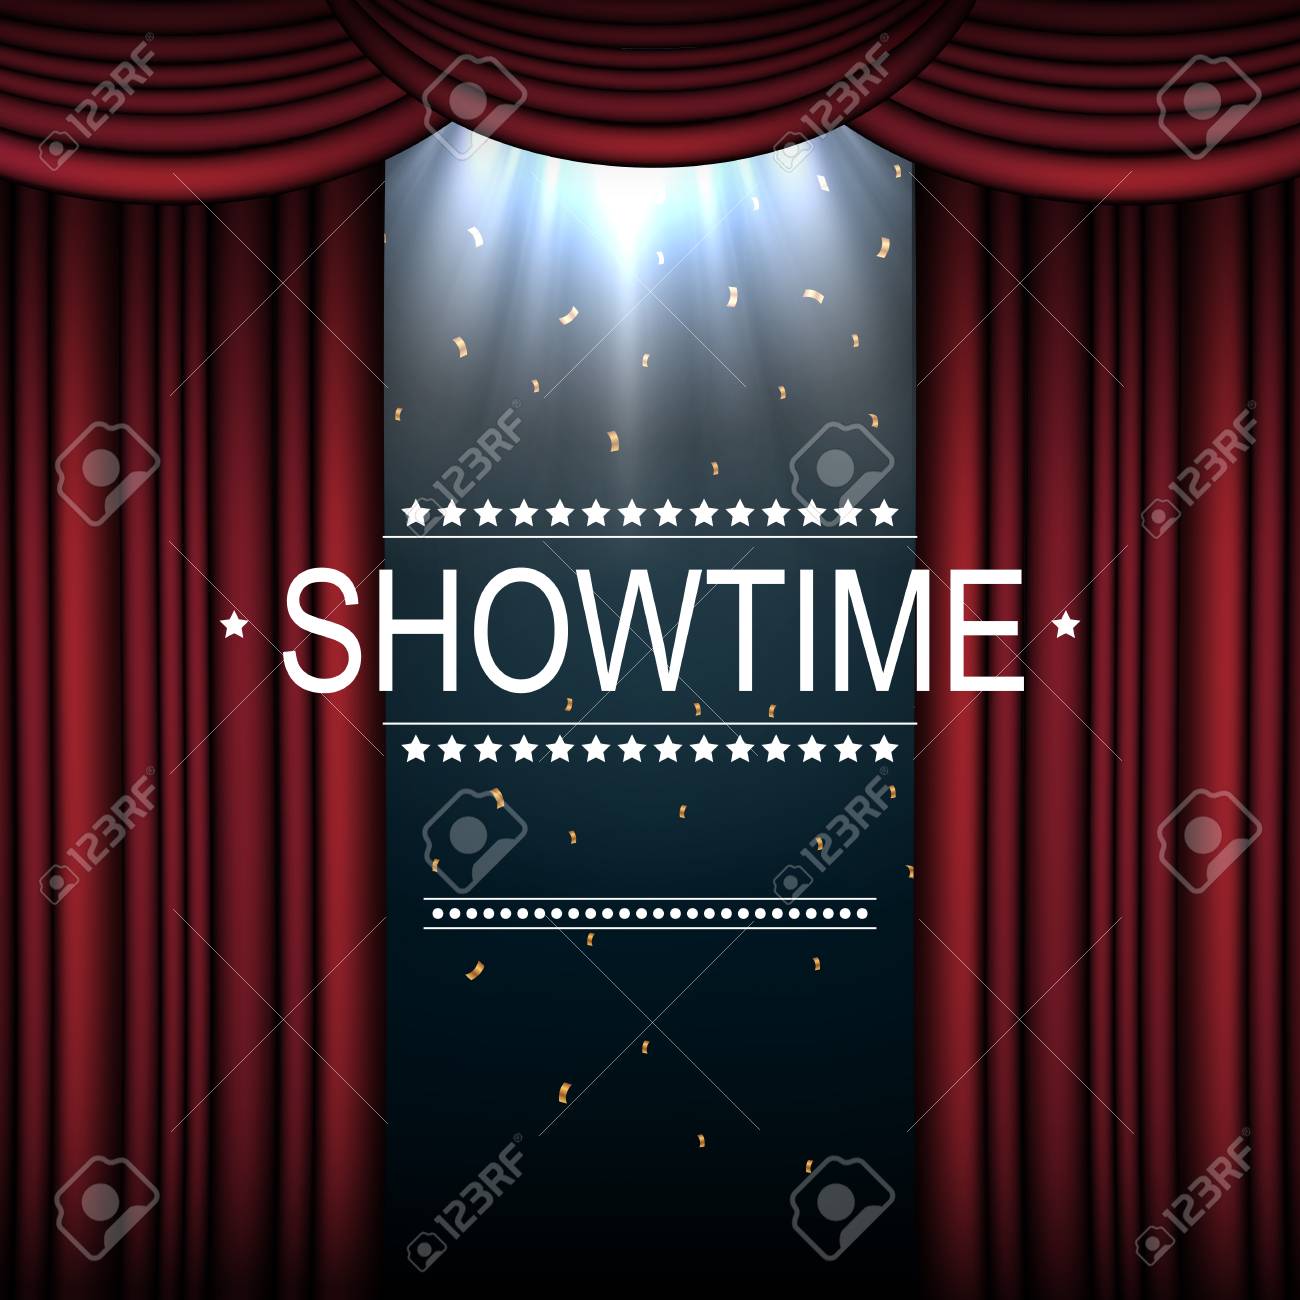 Showtime Background With Curtain Illuminated By Spotlights Stock